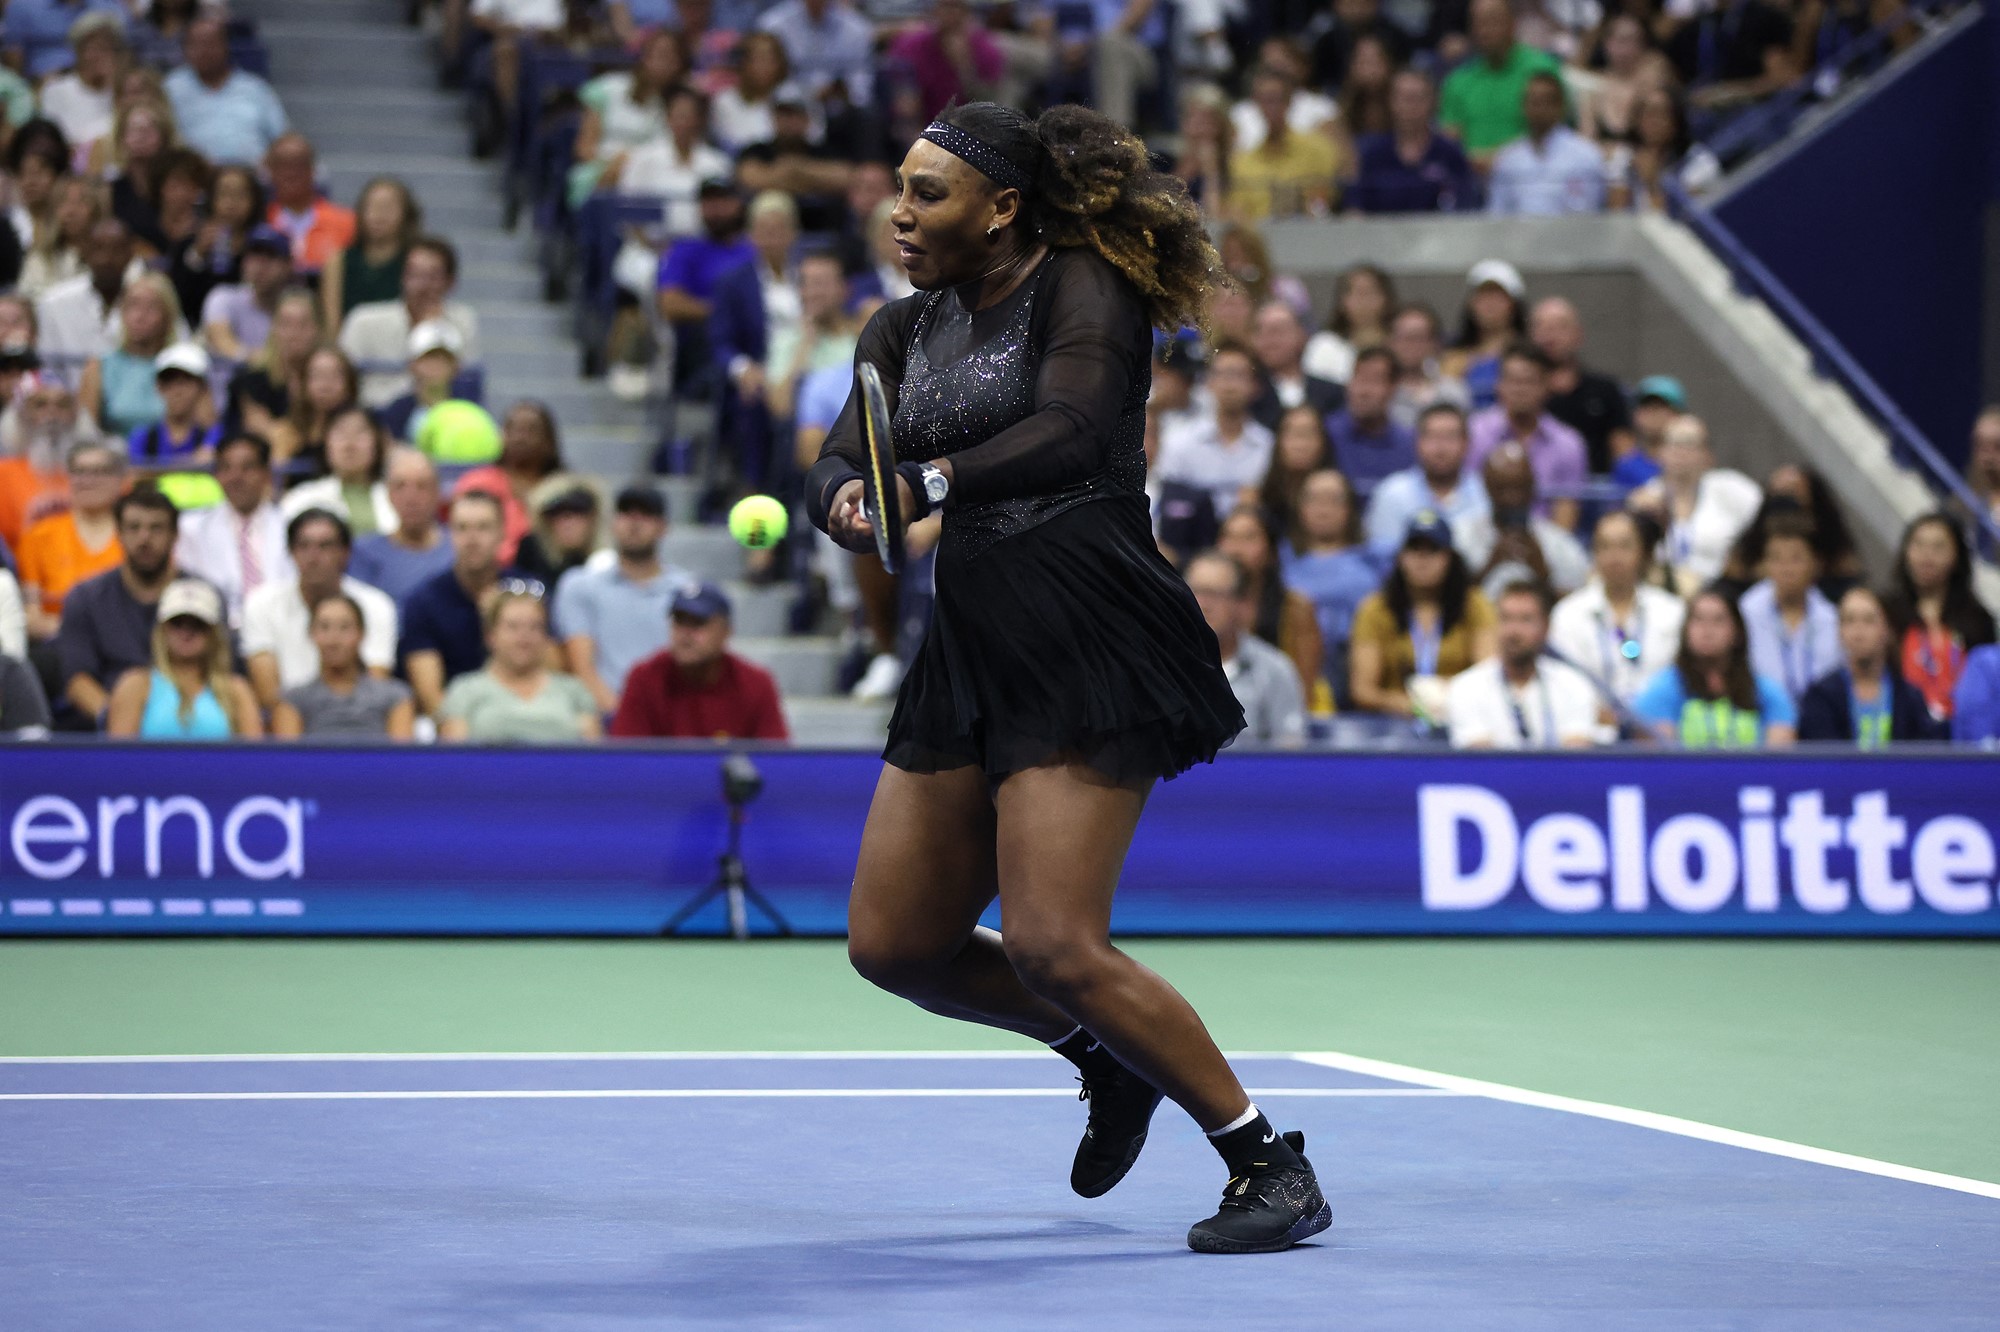 A woman in all black plays tennis.